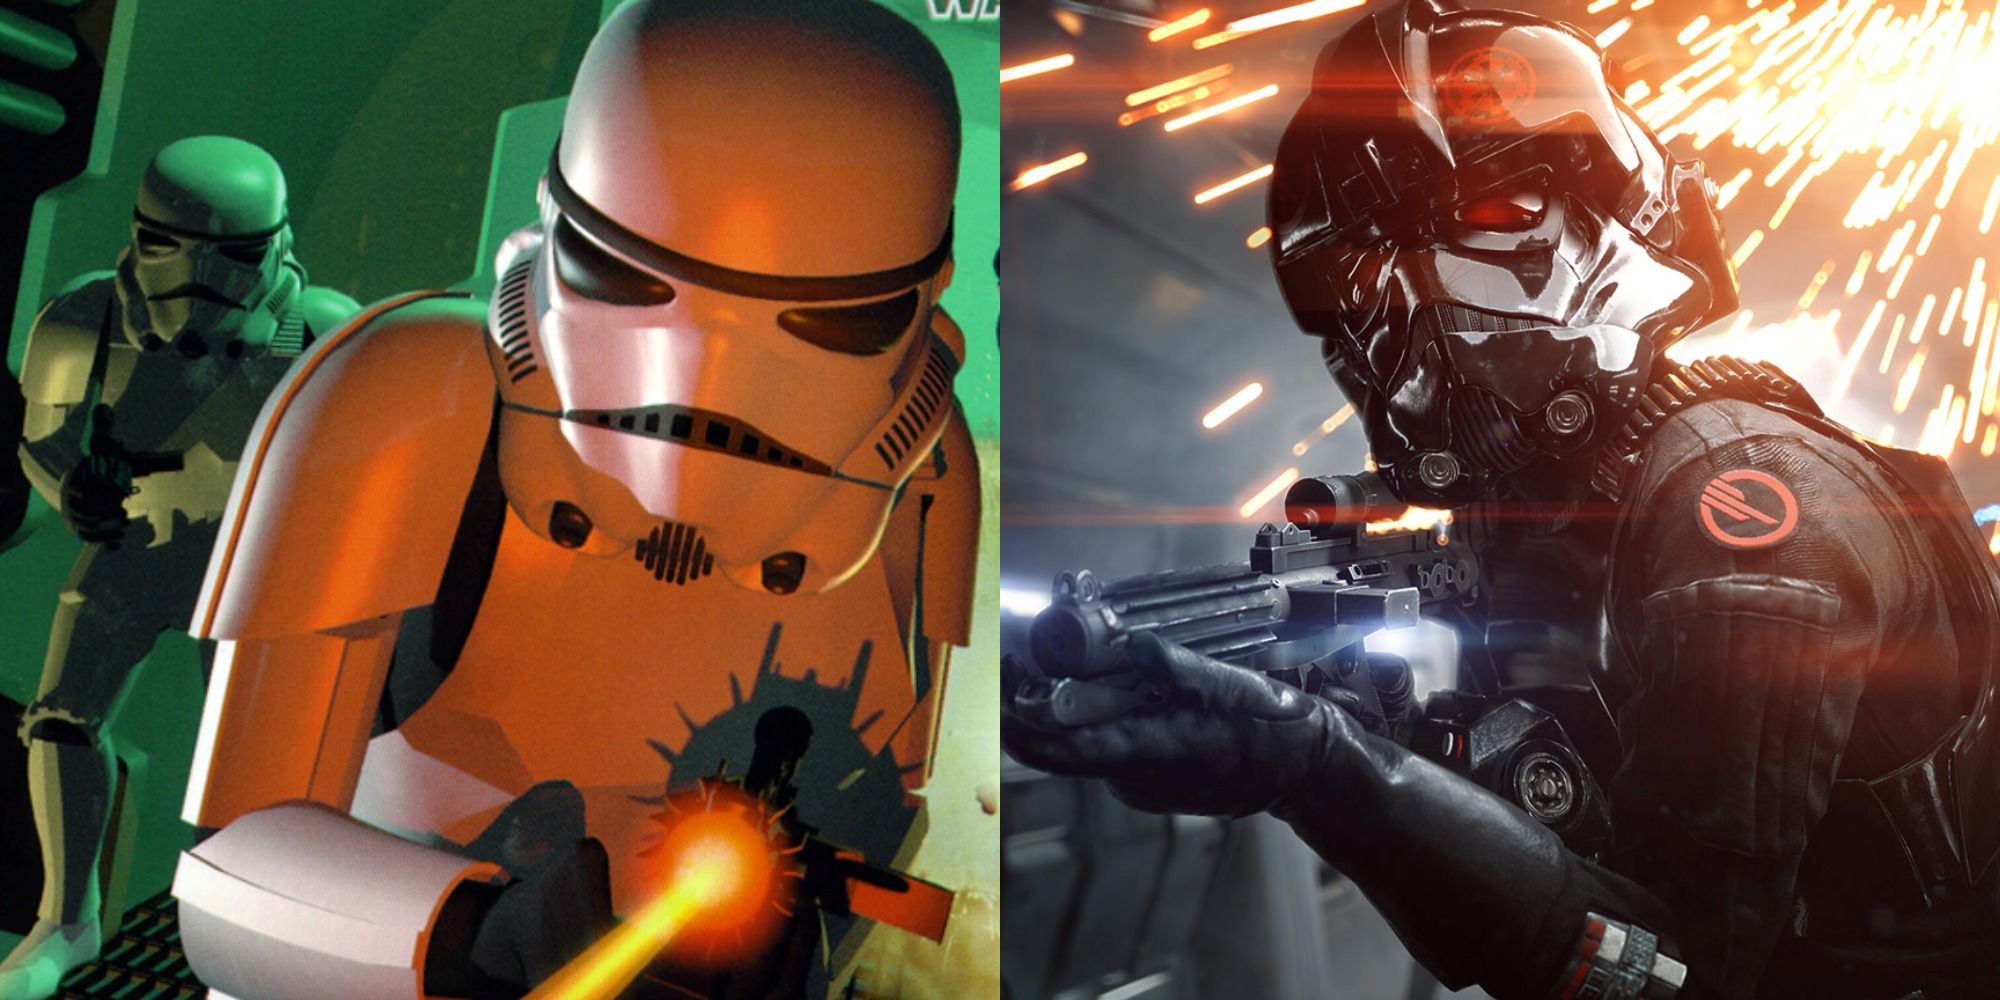 Split image of cover artwork for Dark Forces and Inferno Squad in Star Wars Battlefront II 2017